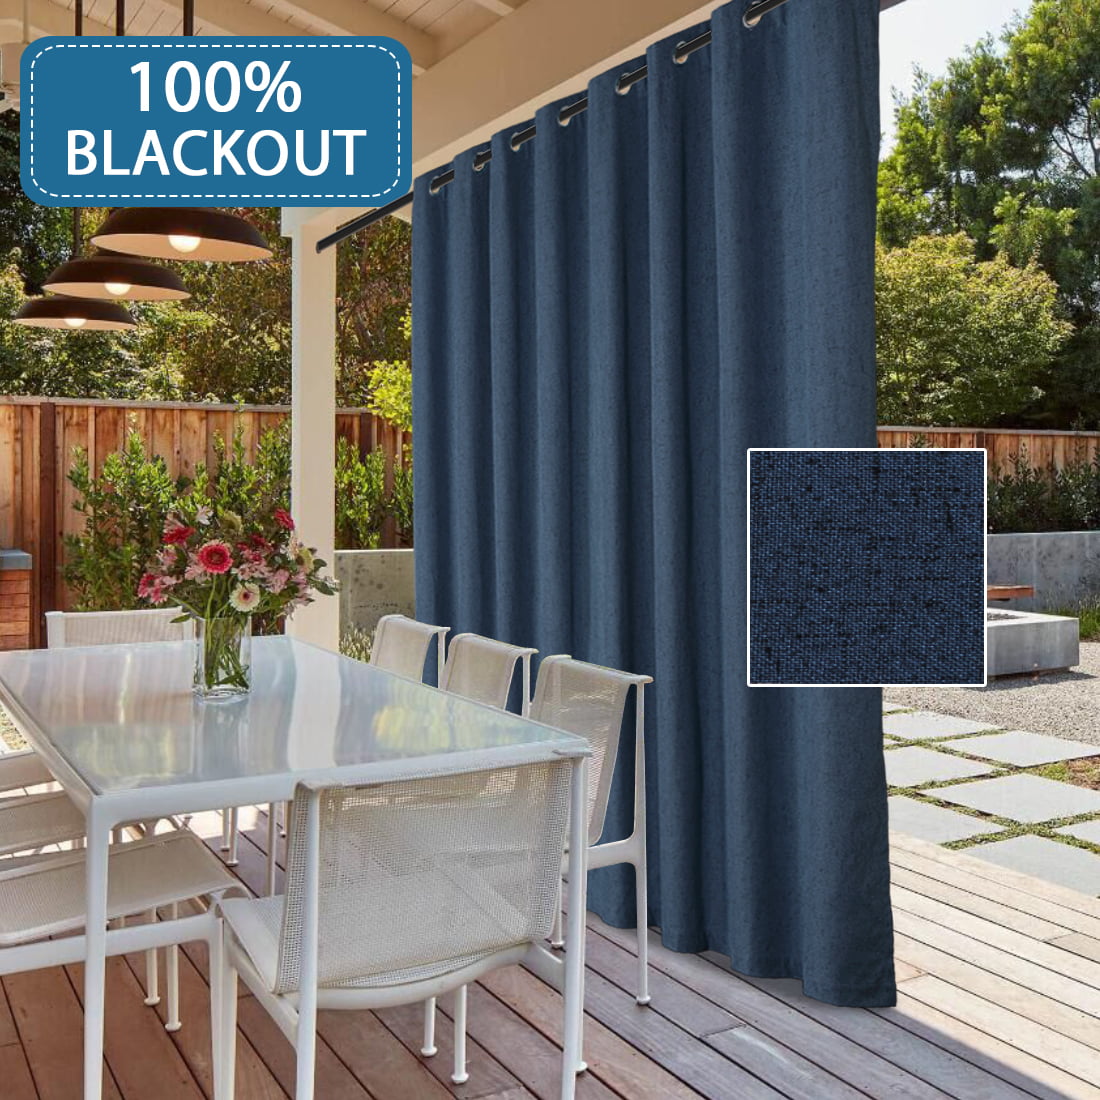 Outdoor Indoor Curtains W52 x L108 for Patio Baby Blue Weather-Resistant Window Panels Privacy Protect Grommet Top Thermal Insulated Home Curtain for Porch Pergola Lawn Garden Hot Tub Area 